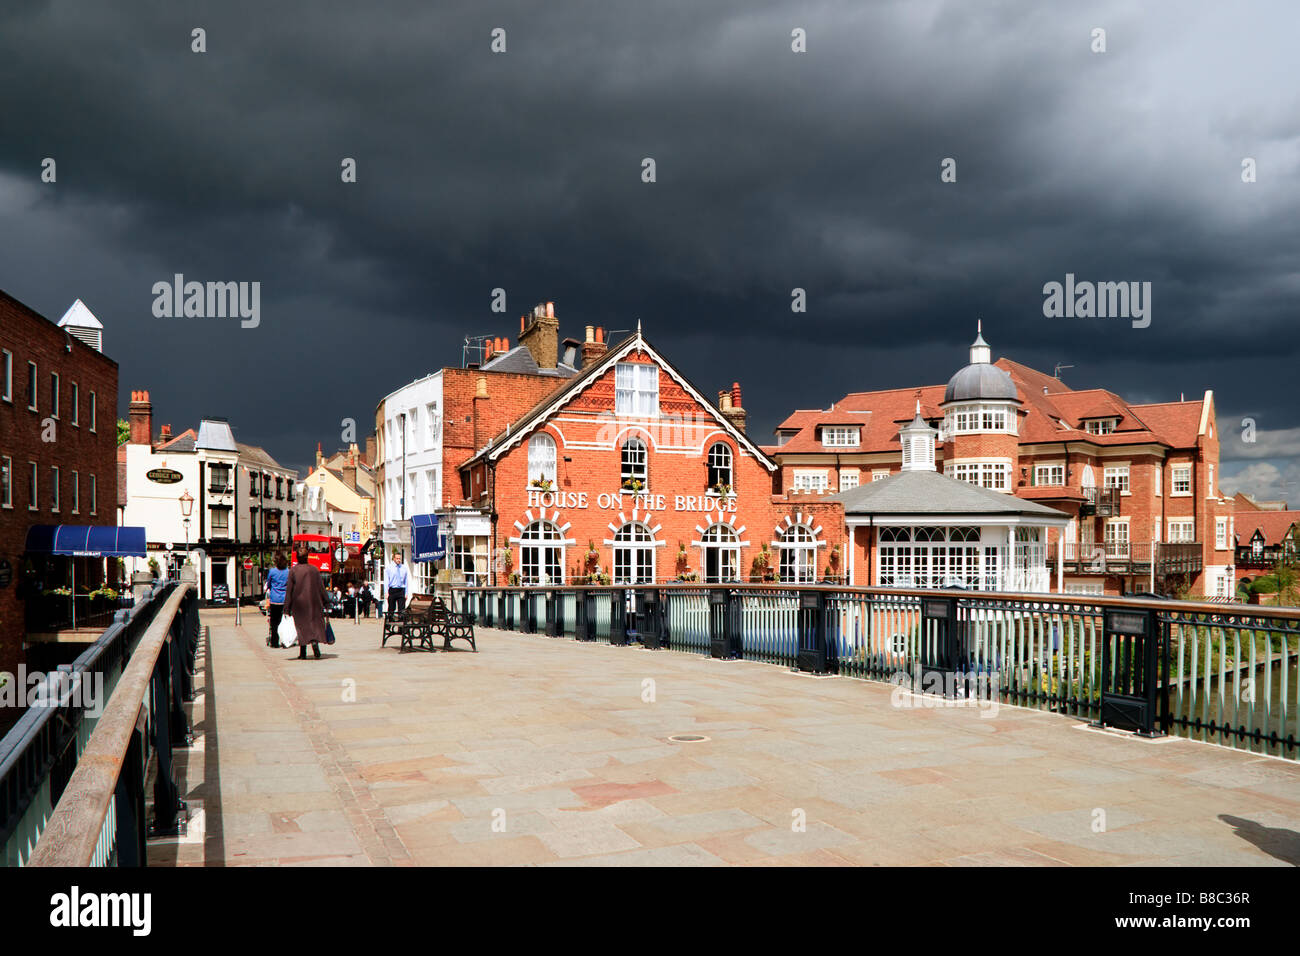 House On The Bridge public house at Windsor with approaching storm Stock Photo